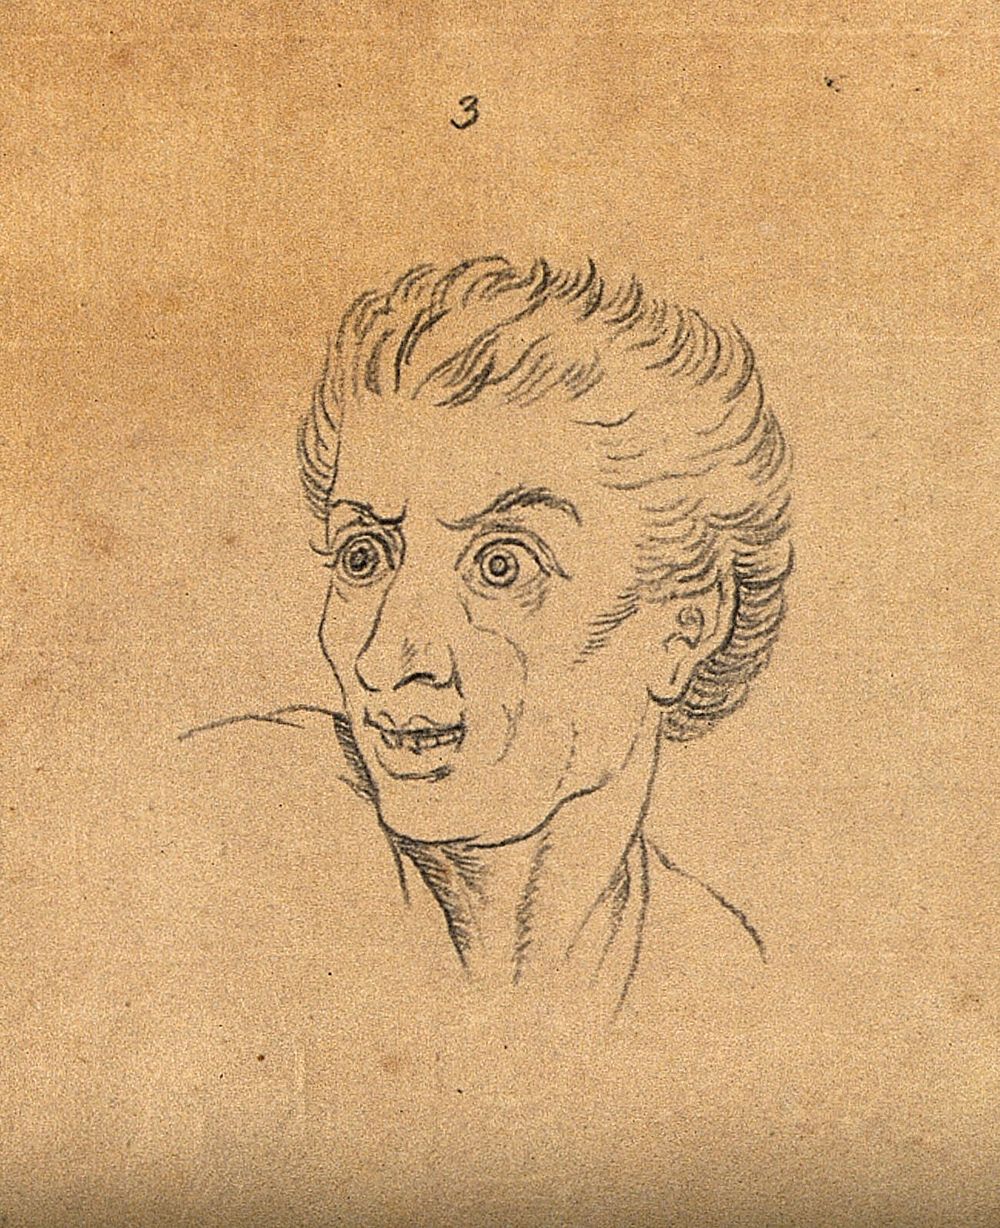 Six physiognomies. Drawing, c. 1789, after C. Le Brun.